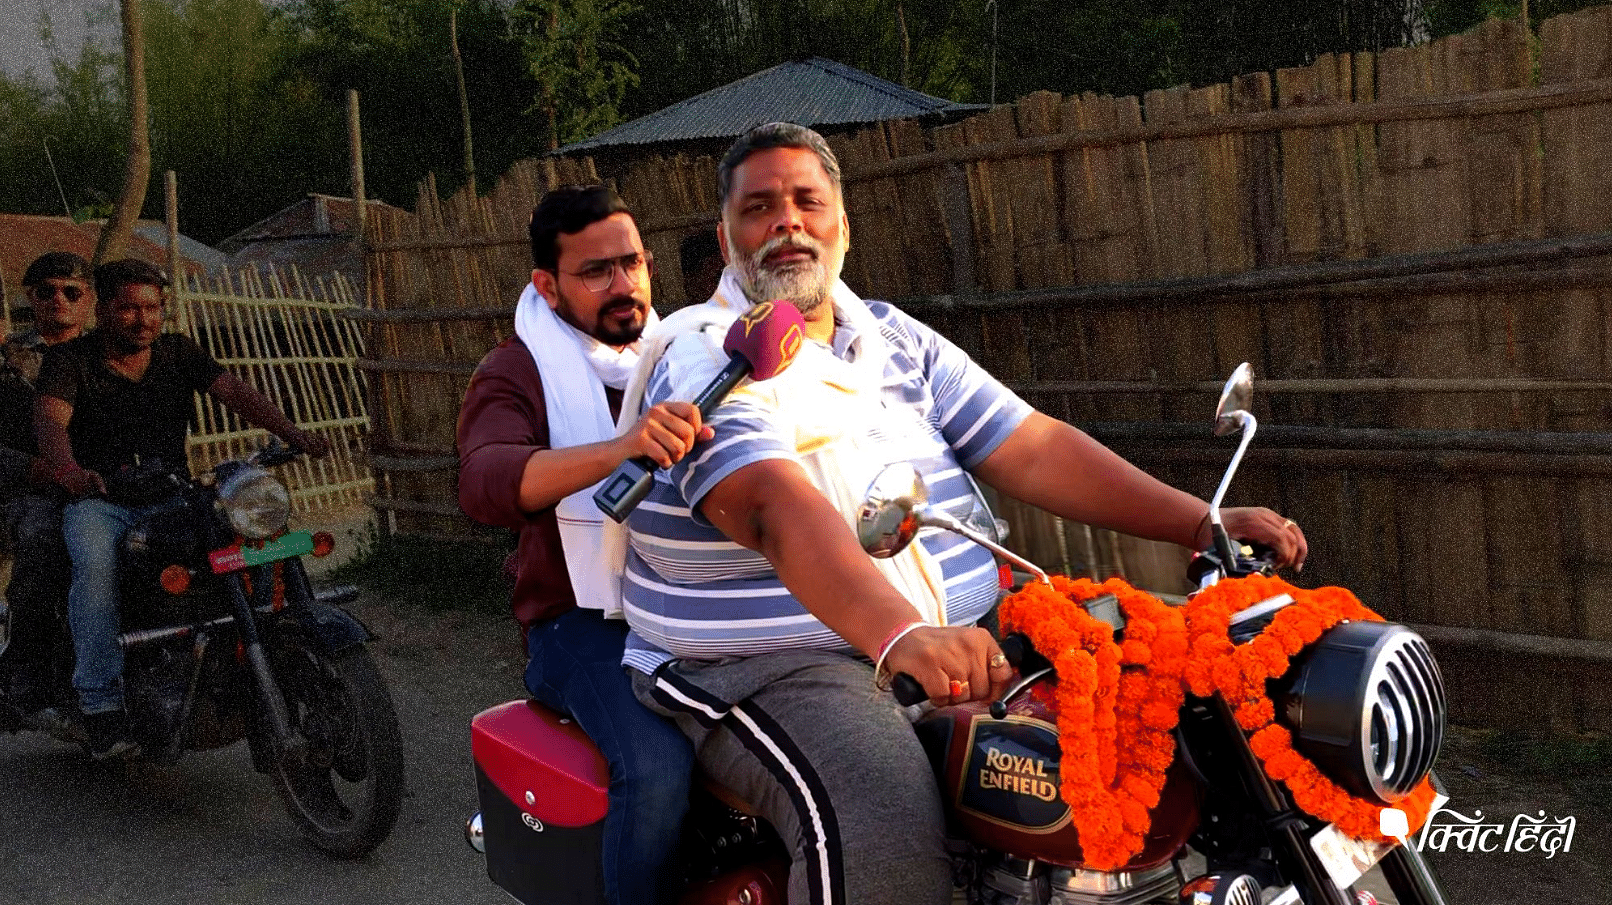 The Quint caught up with Pappu Yadav in Madhepura and spoke to him about PM Modi, Bihar CM Nitish Kumar &amp; his election.